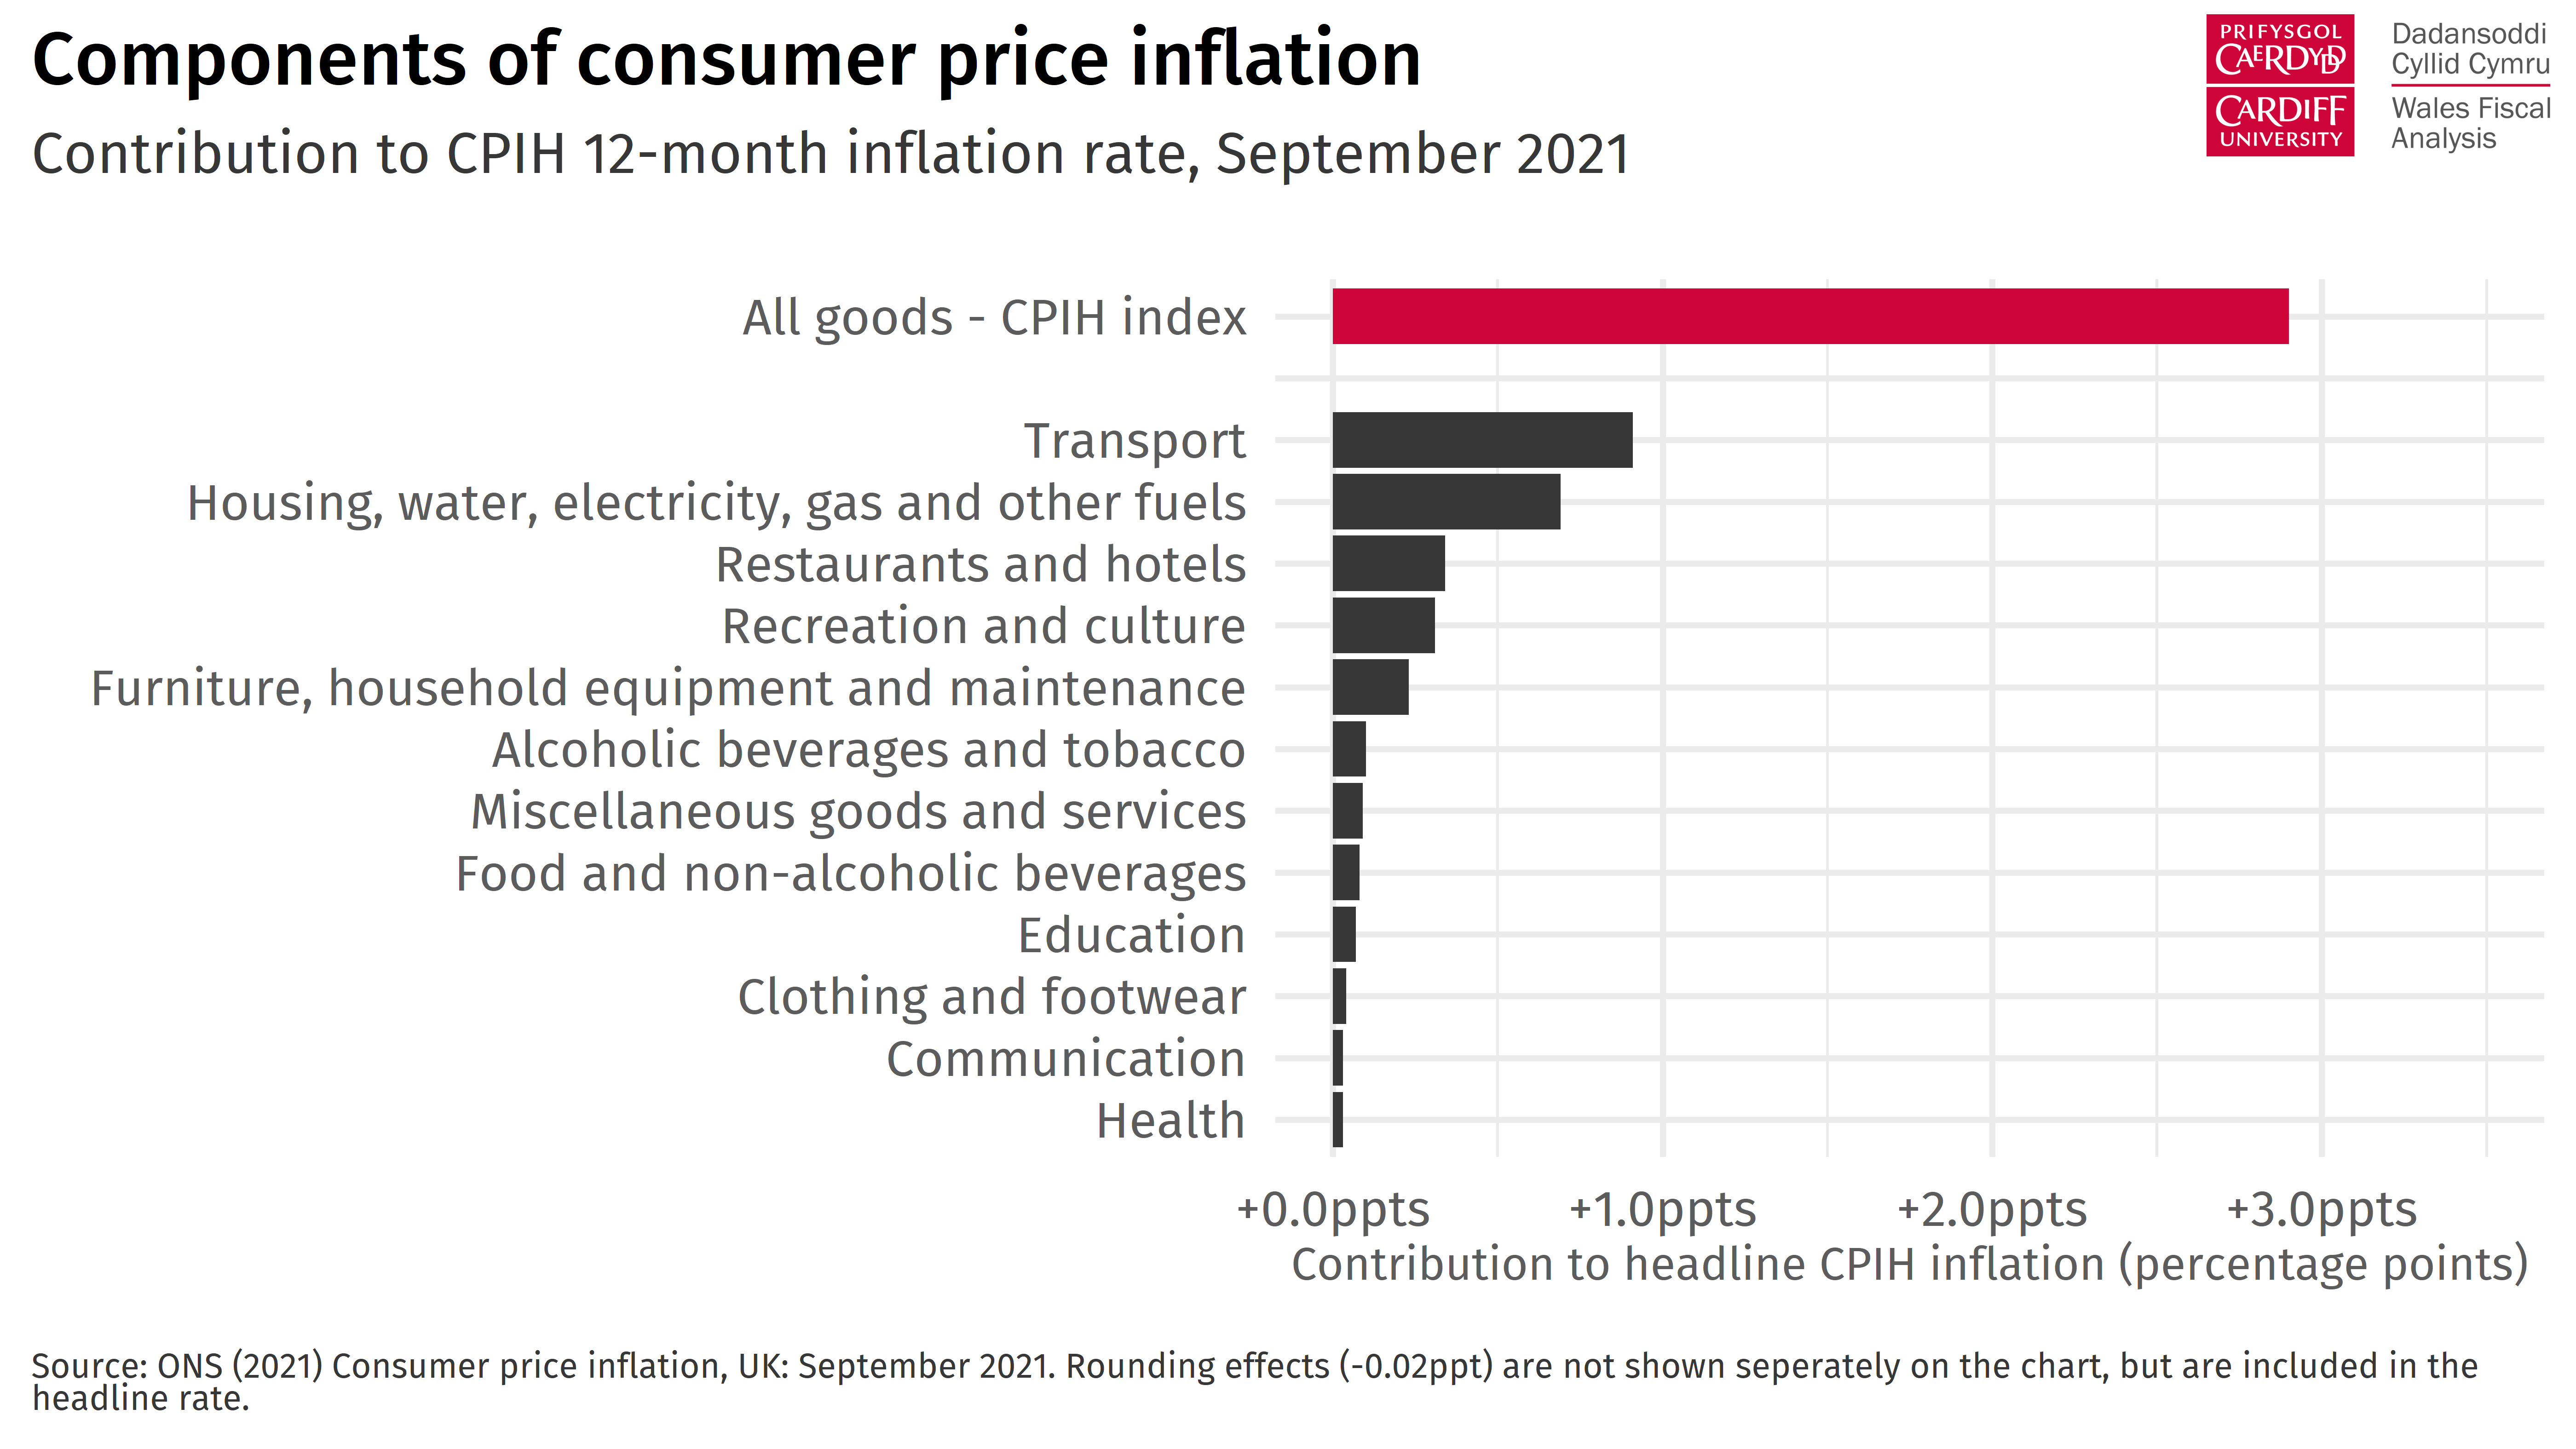 Bar chart showing the contribution of different items in the consumer basket to the headline CPIH rate in September 2021.